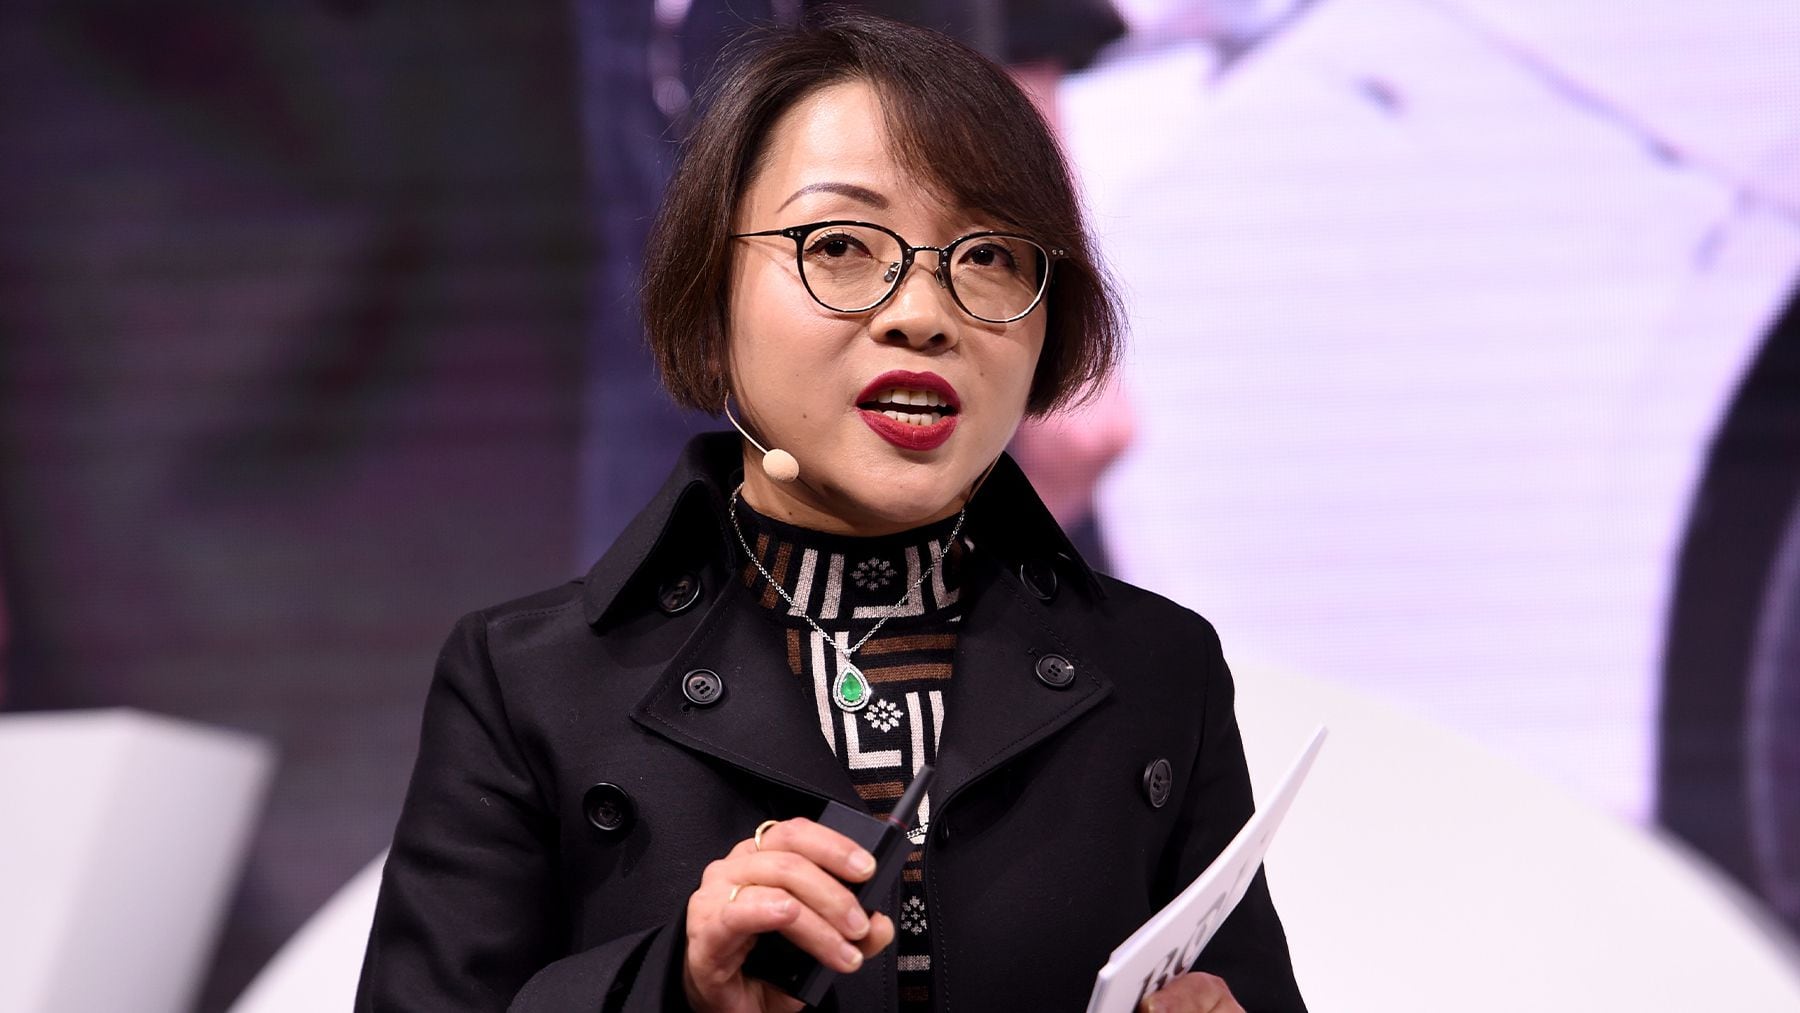 Lanvin Group Replaces Joann Cheng With New CEO